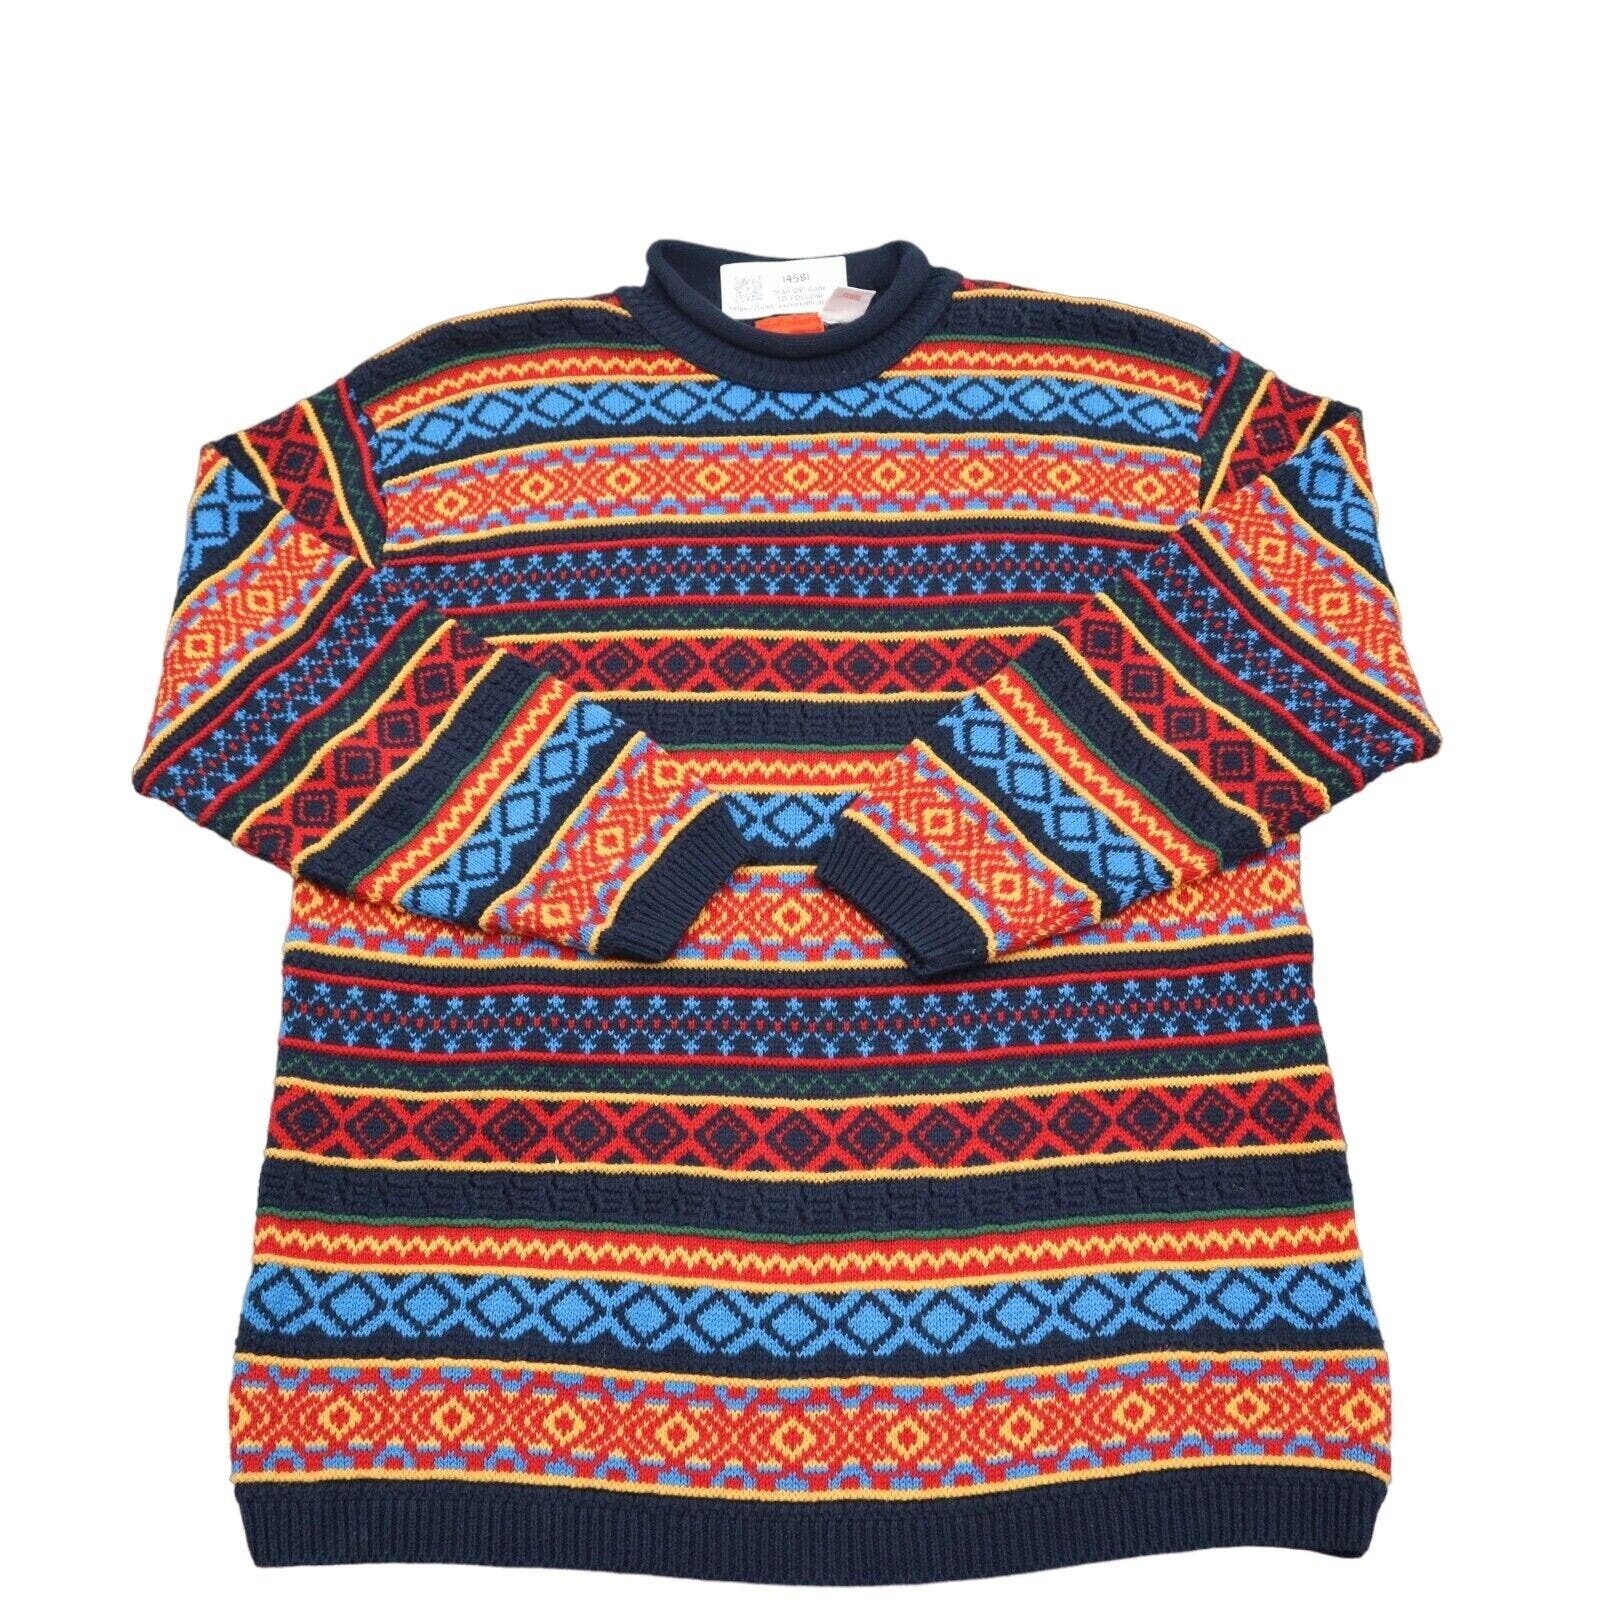 Primary image for Liz and Co Sweater Mens S Multicolor Knit Fair Isle Long Sleeve Round Neck